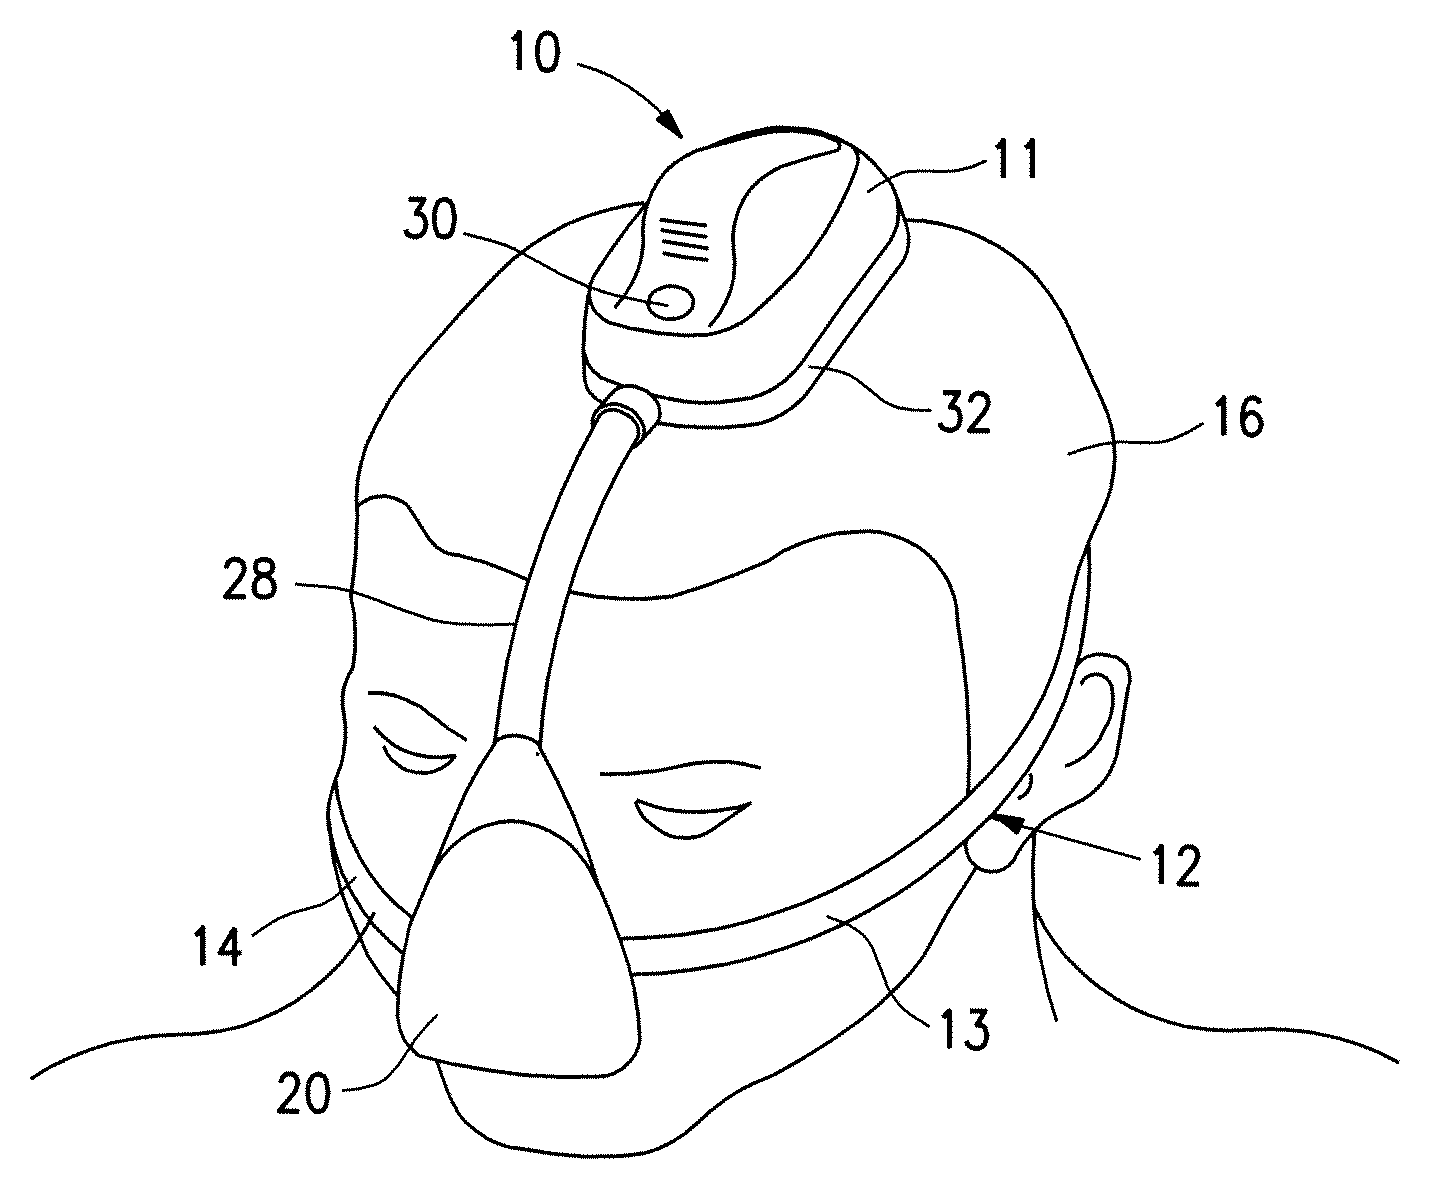 Positive Airway Pressure System With Head Position Control